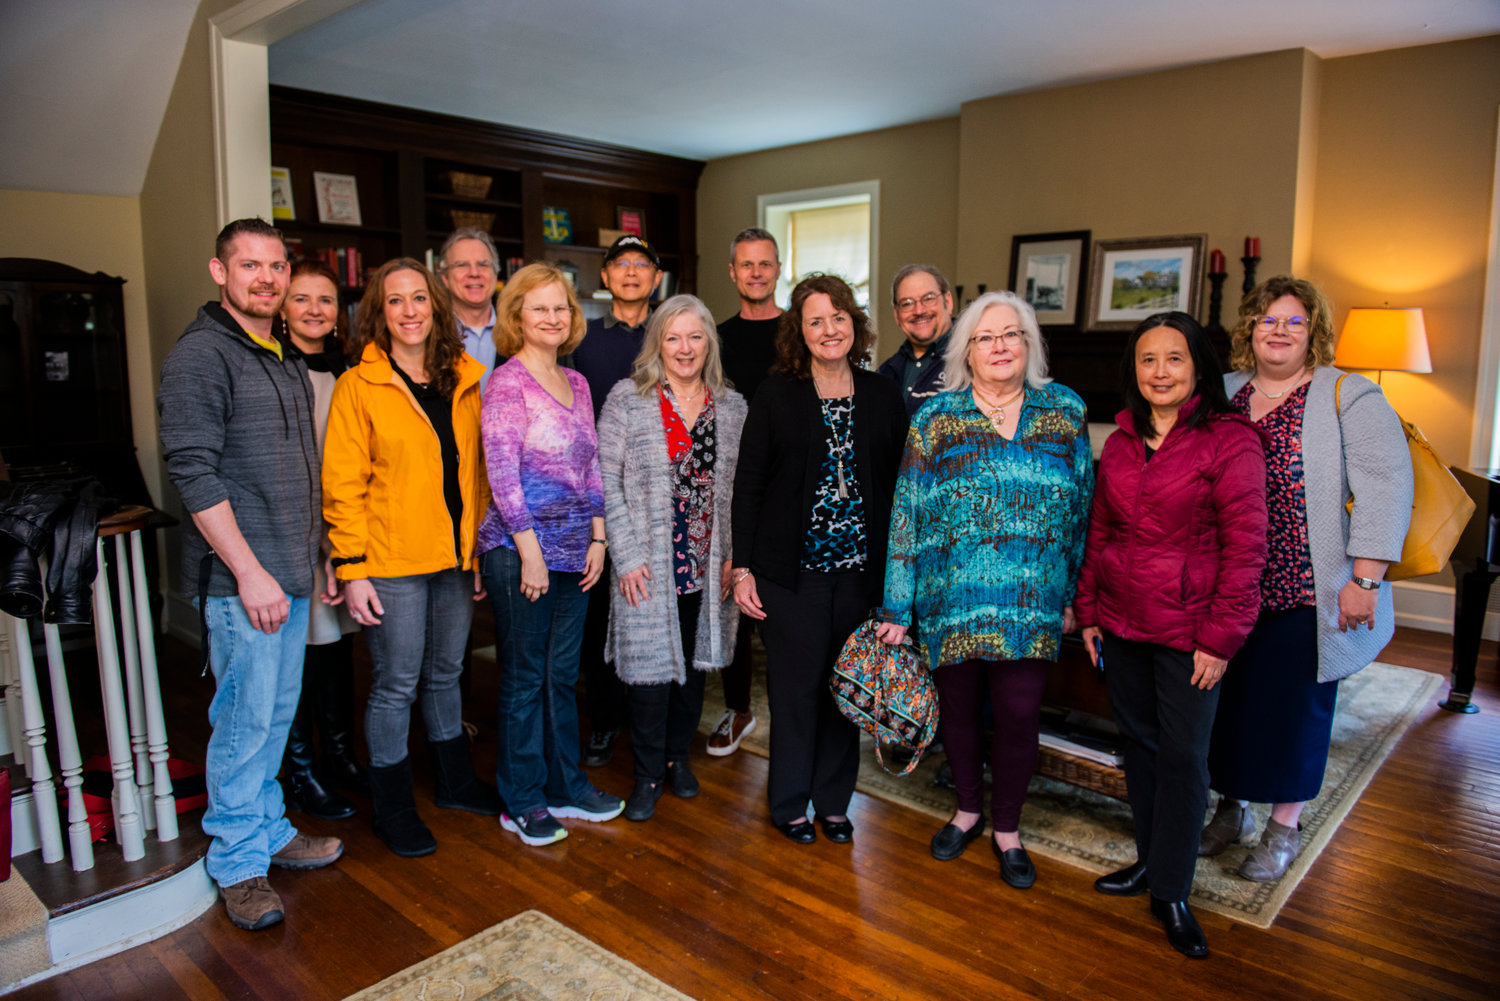 Members of the Philly POPS and some of their spouses tour the home of the late Oscar Hammerstein II.